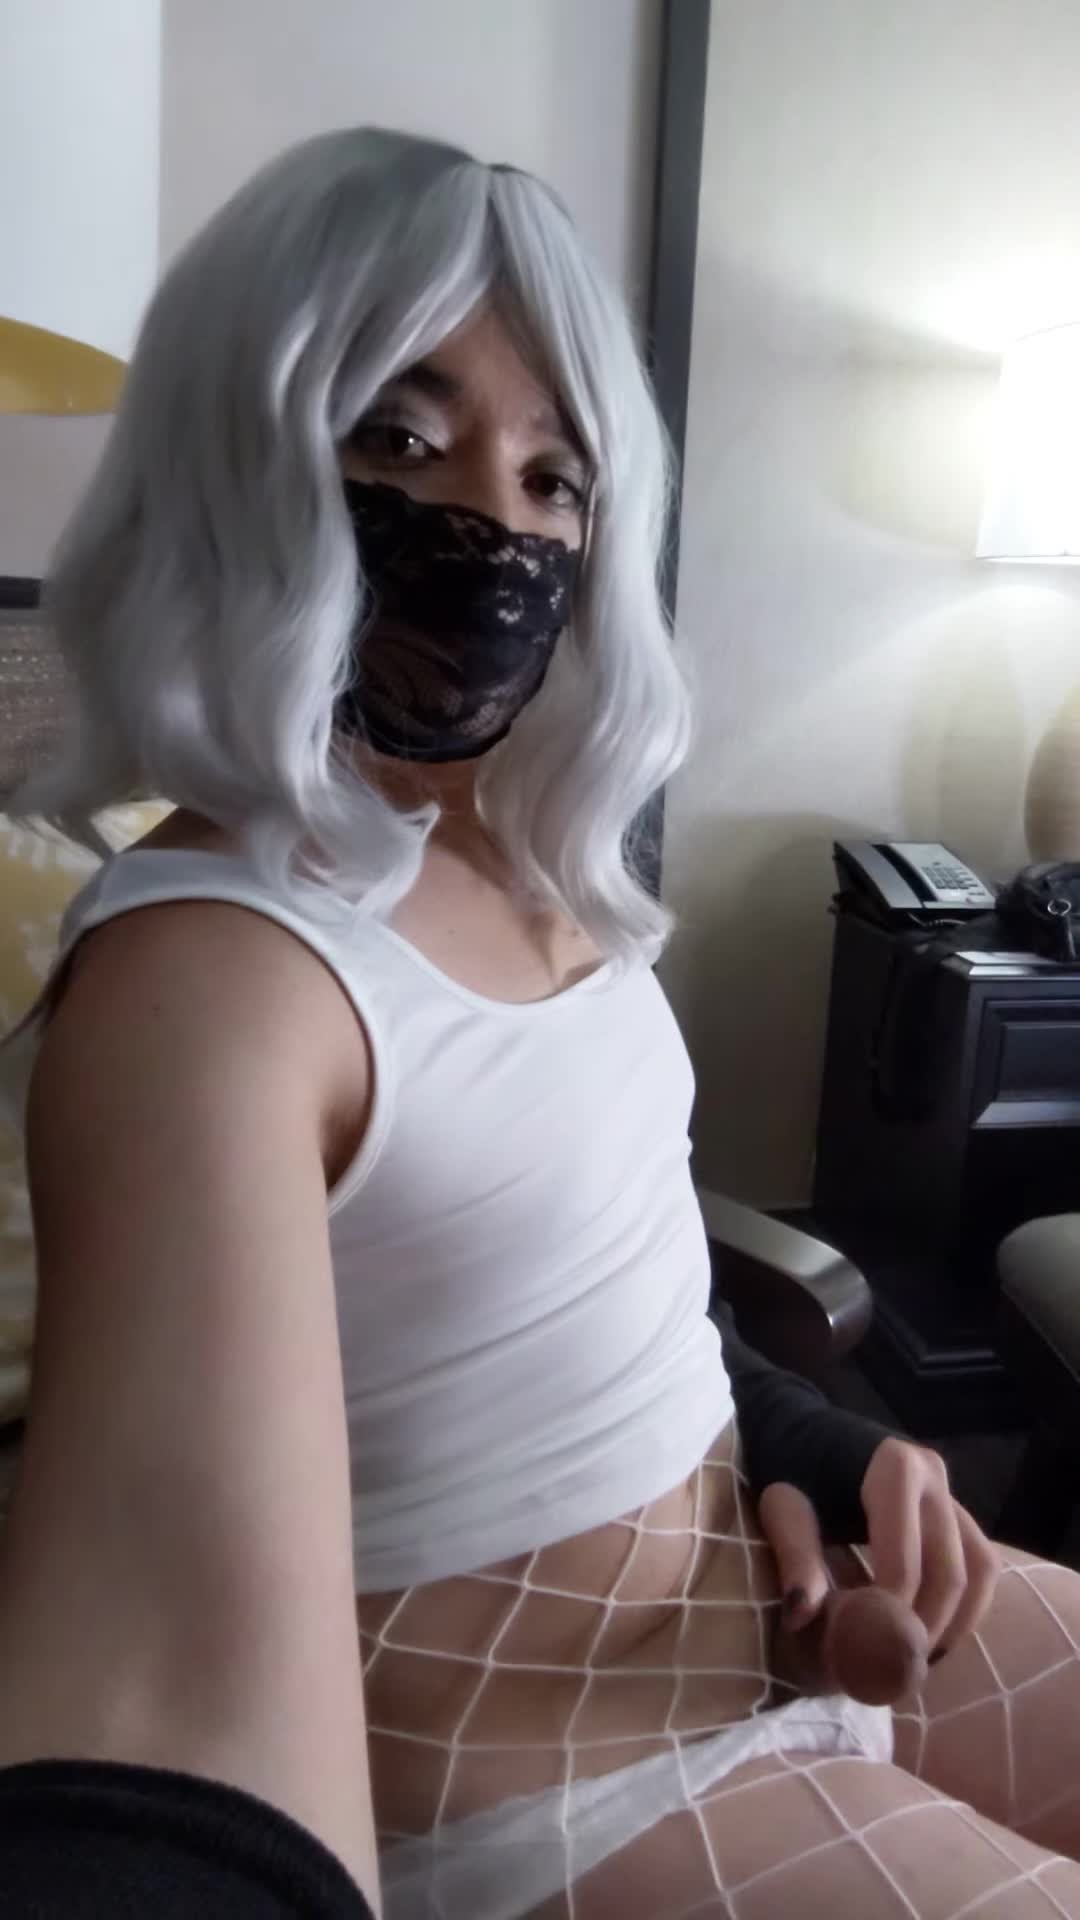 Watch the Video by Femboy Esha with the username @eshalewdus, who is a verified user, posted on August 19, 2023 and the text says 'I couldn't help it~

#femboy #sissy #feminization #crossdressing #lewd #masterbation'